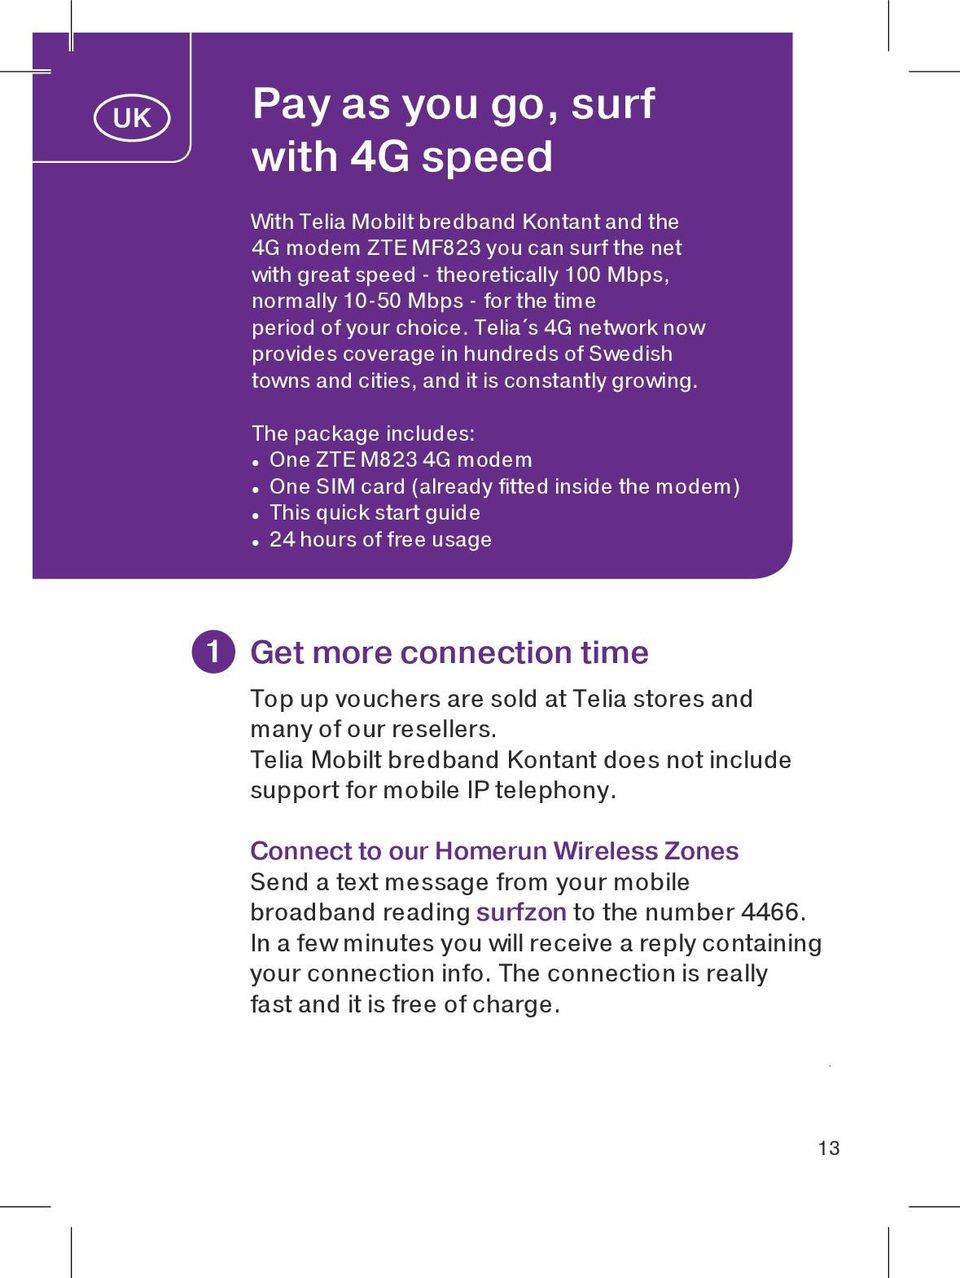 The package includes: One ZTE M823 4G modem One SIM card (already fitted inside the modem) This quick start guide 24 hours of free usage 1 Get more connection time Top up vouchers are sold at Telia